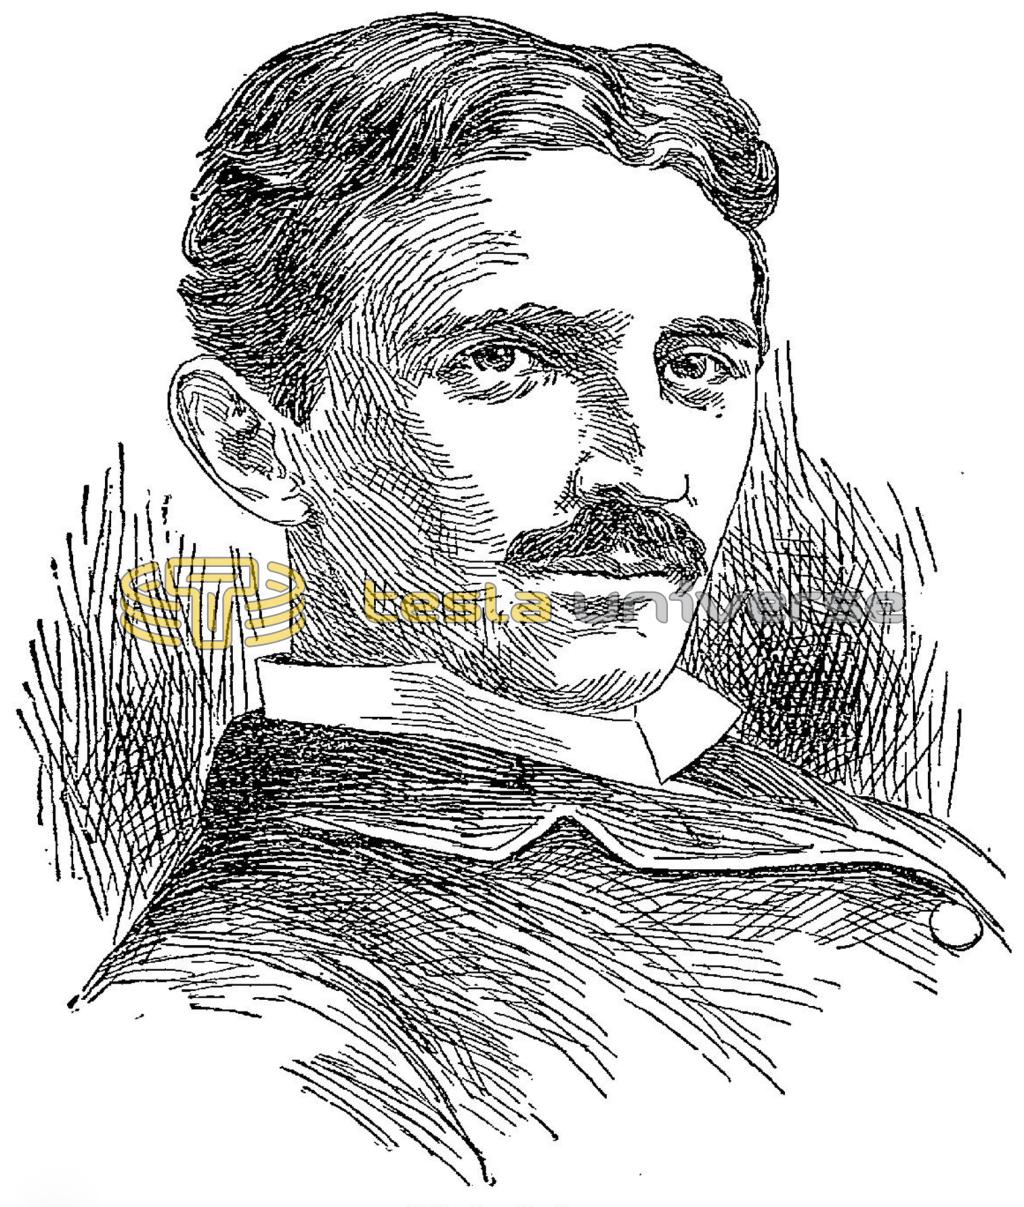 Sketch of Nikola Tesla from the time his lab burned